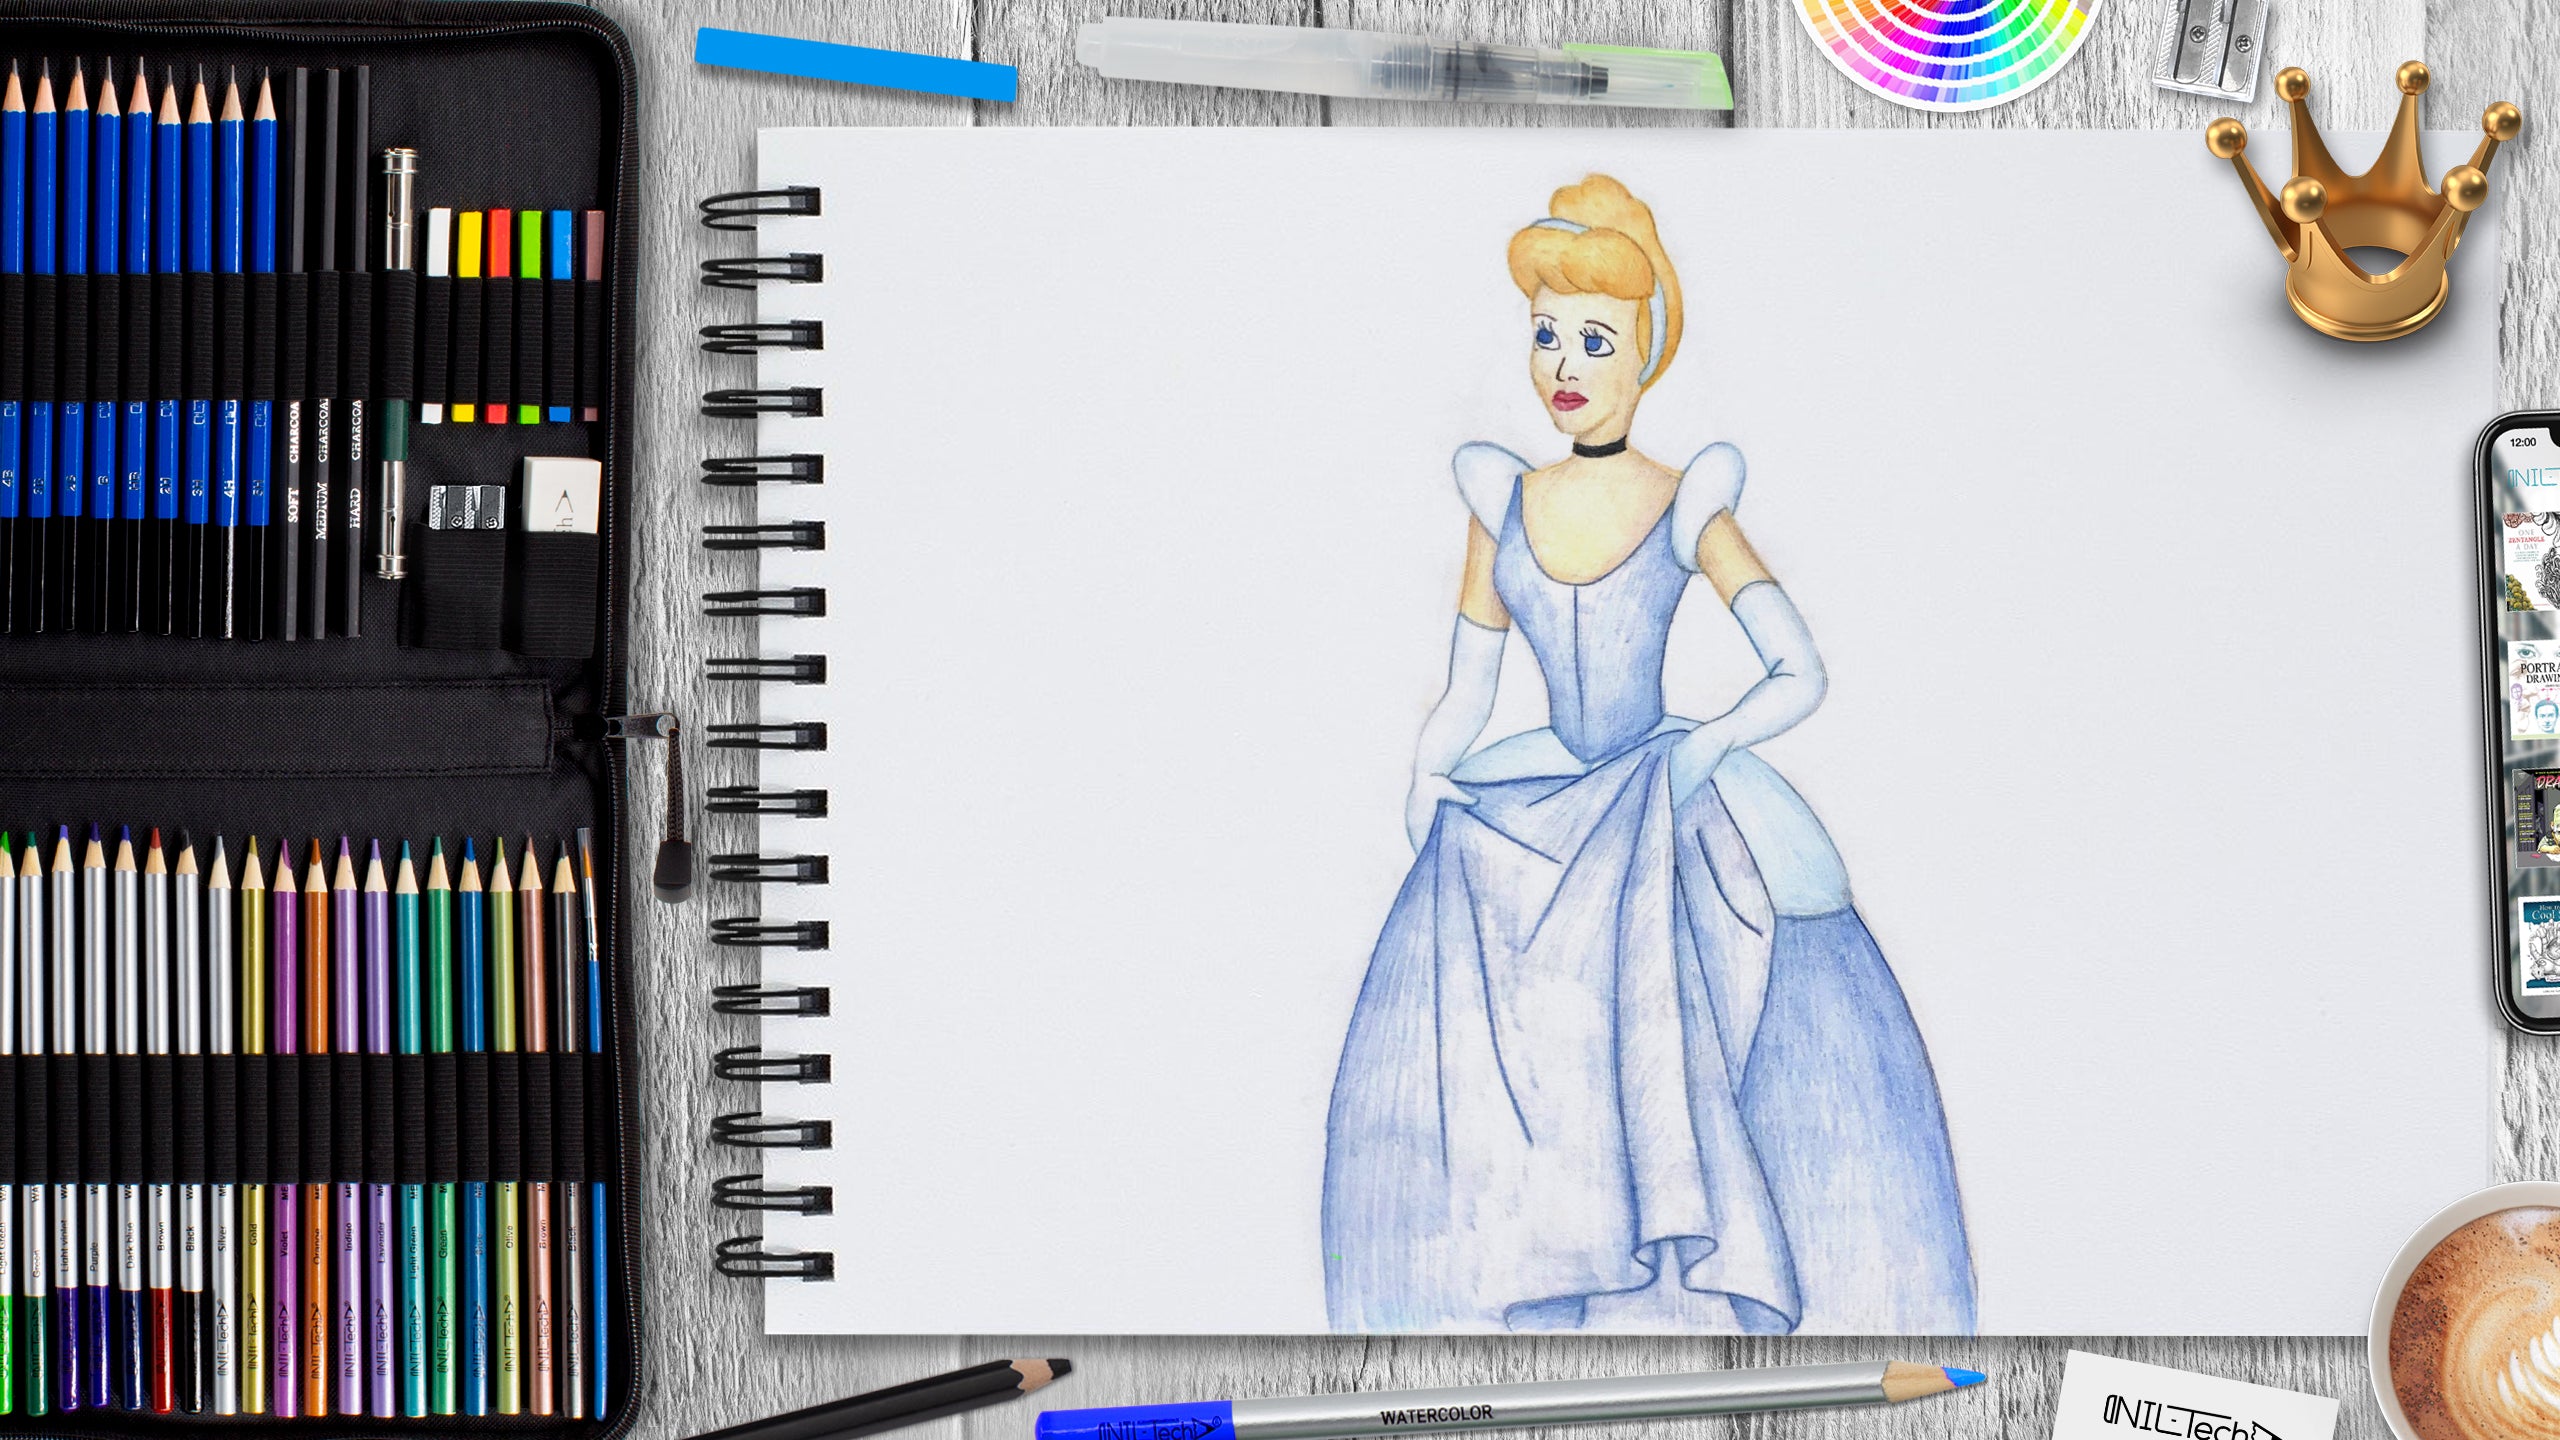 How to draw Cinderella | Step by step Drawing tutorials